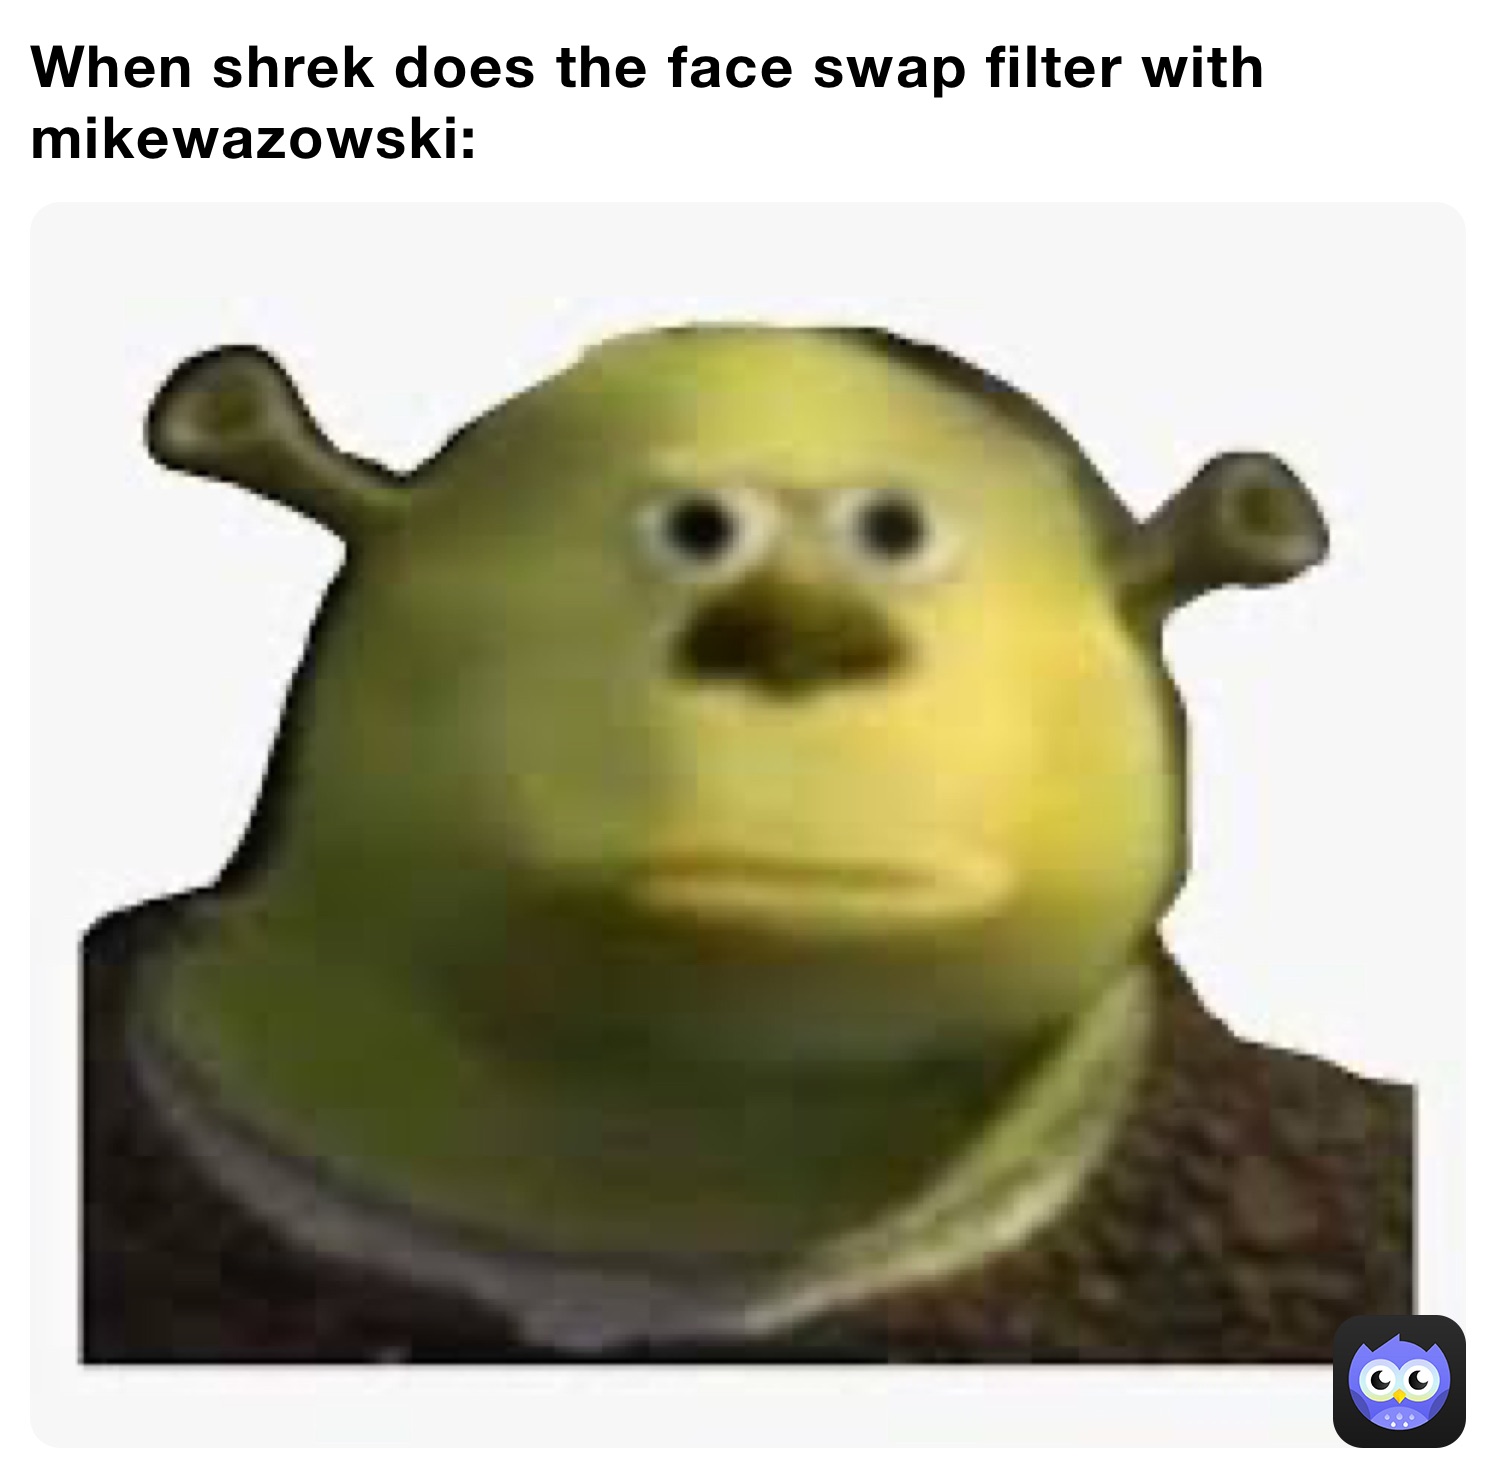 When shrek does the face swap filter with mikewazowski: